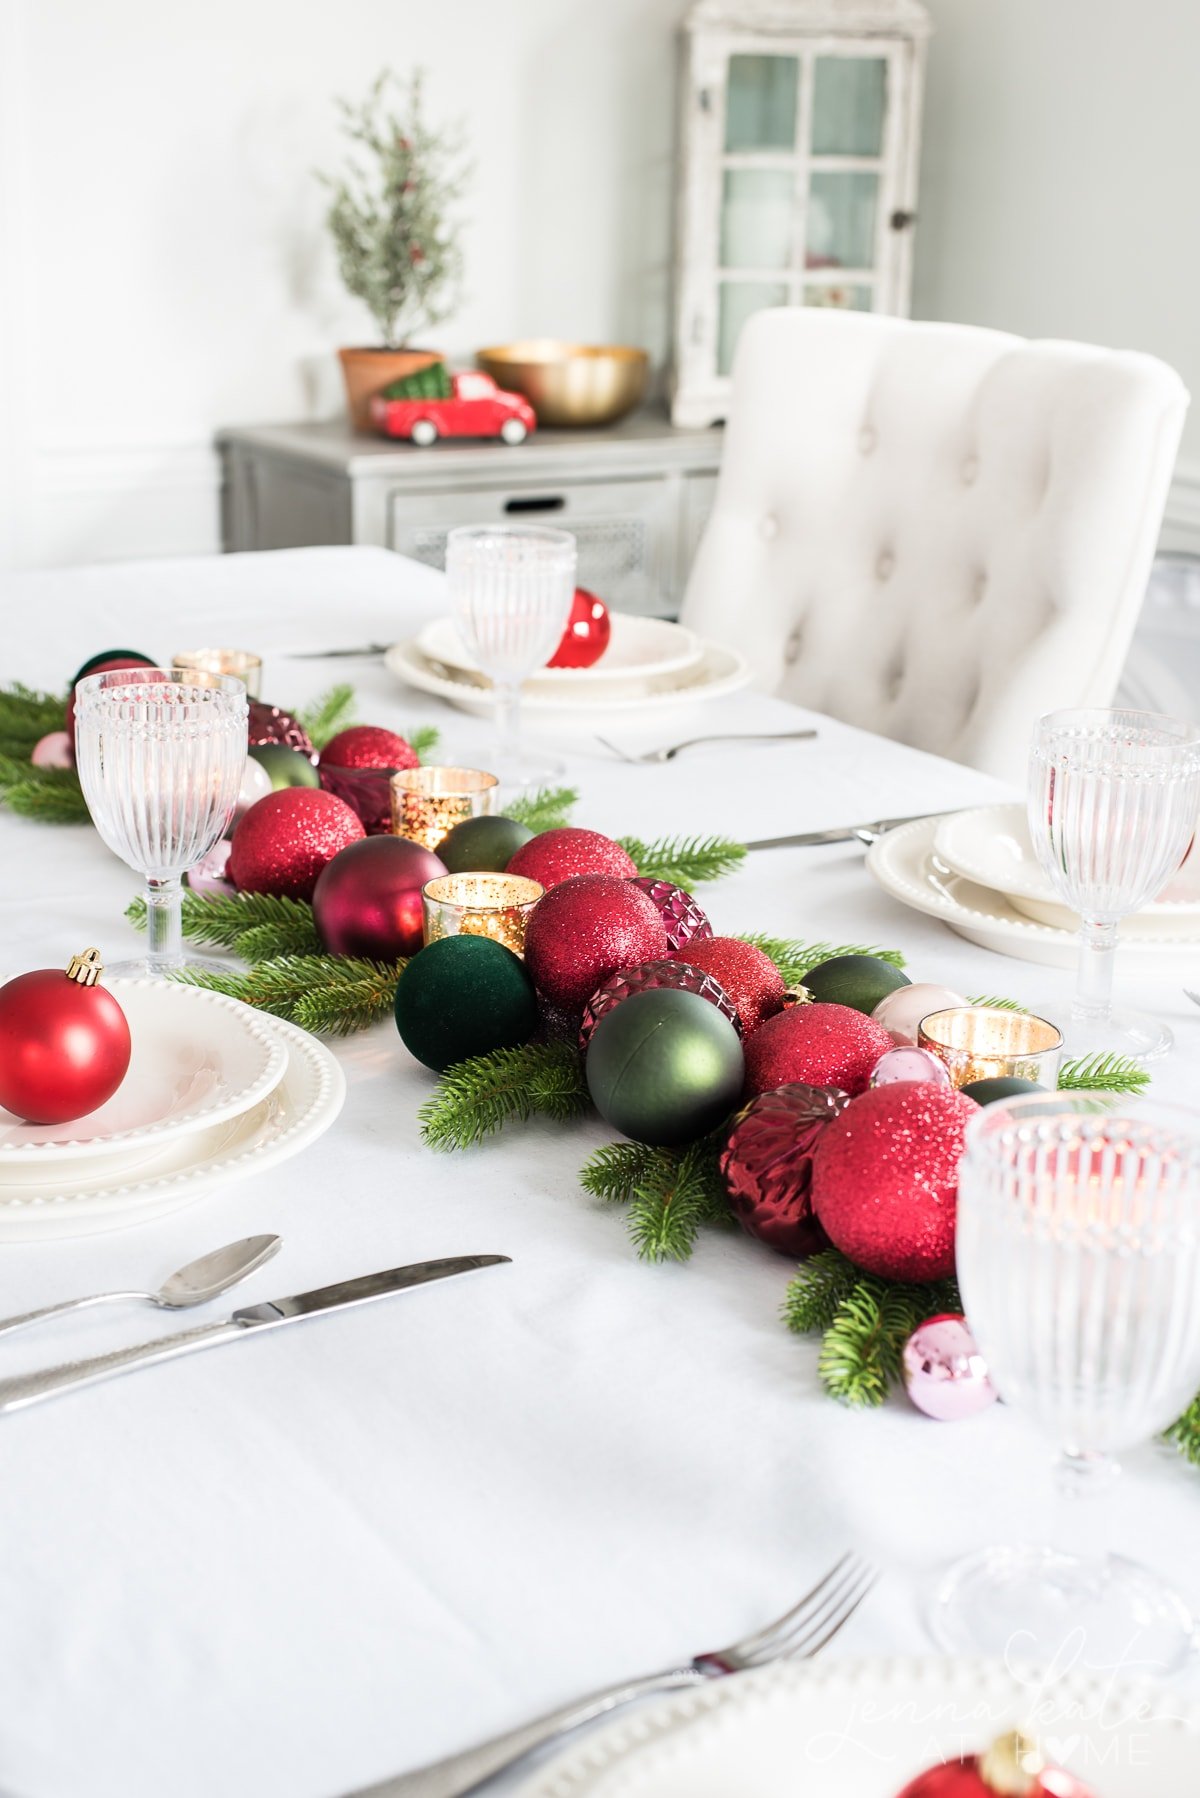 Quick and easy Christmas table decorations